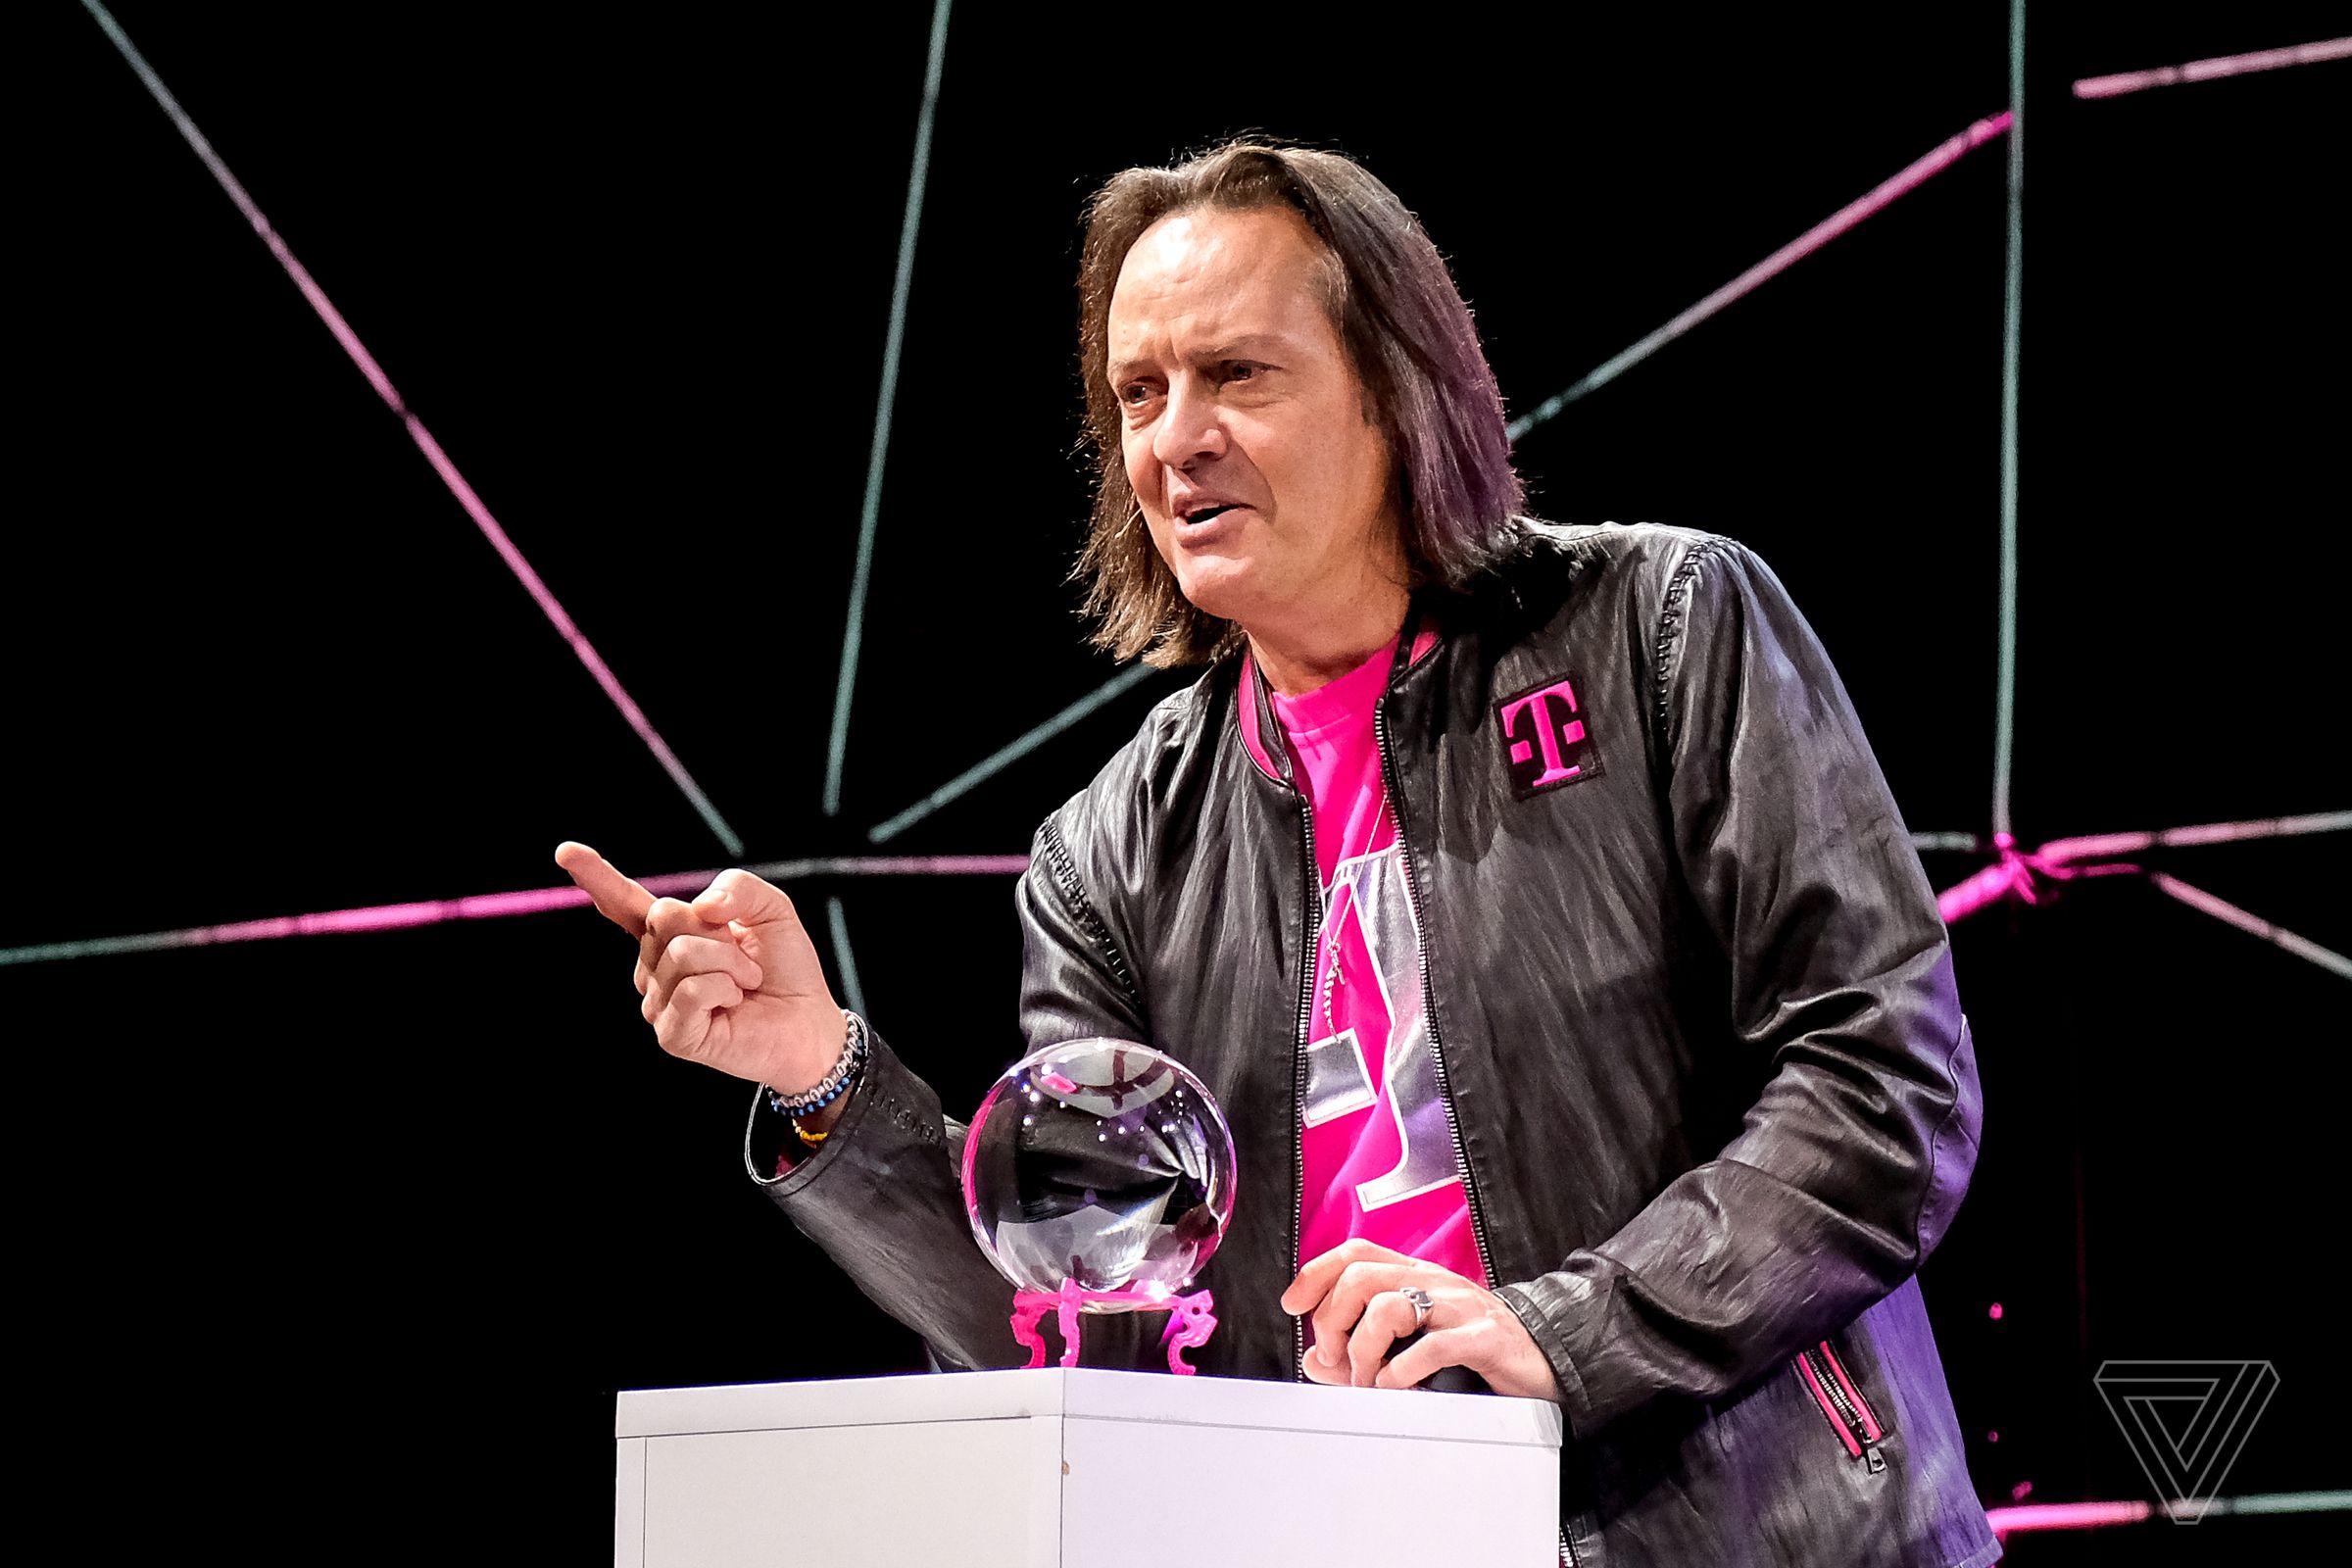 At CES, Legere predicted consolidation would occur in the wireless industry this year.